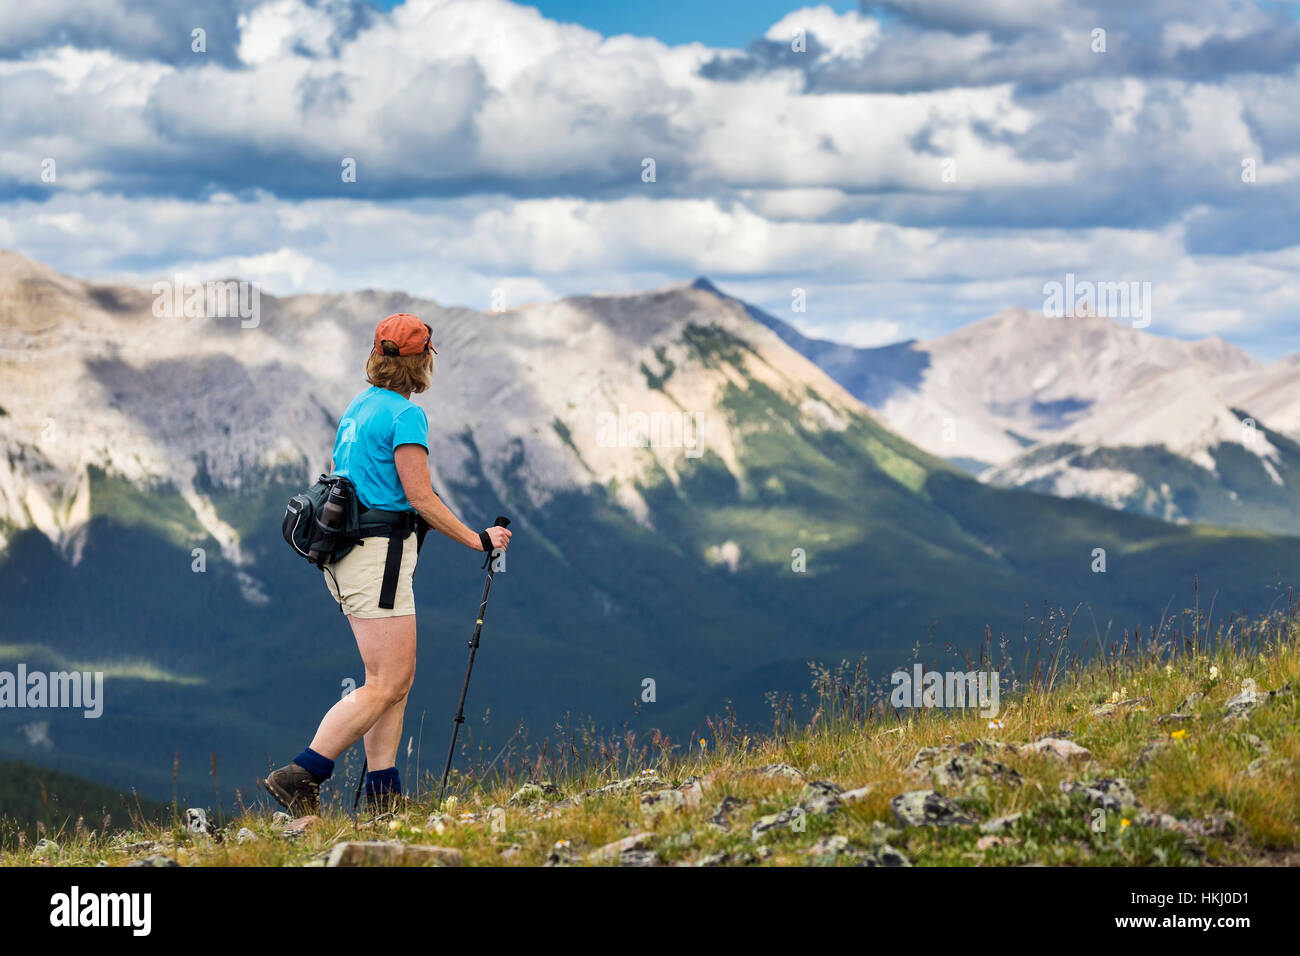 Female hiker walking along a rocky hill overlooking mountain range and valley with a cloudy sky, West of Bragg Creek; Alberta, Canada Stock Photo